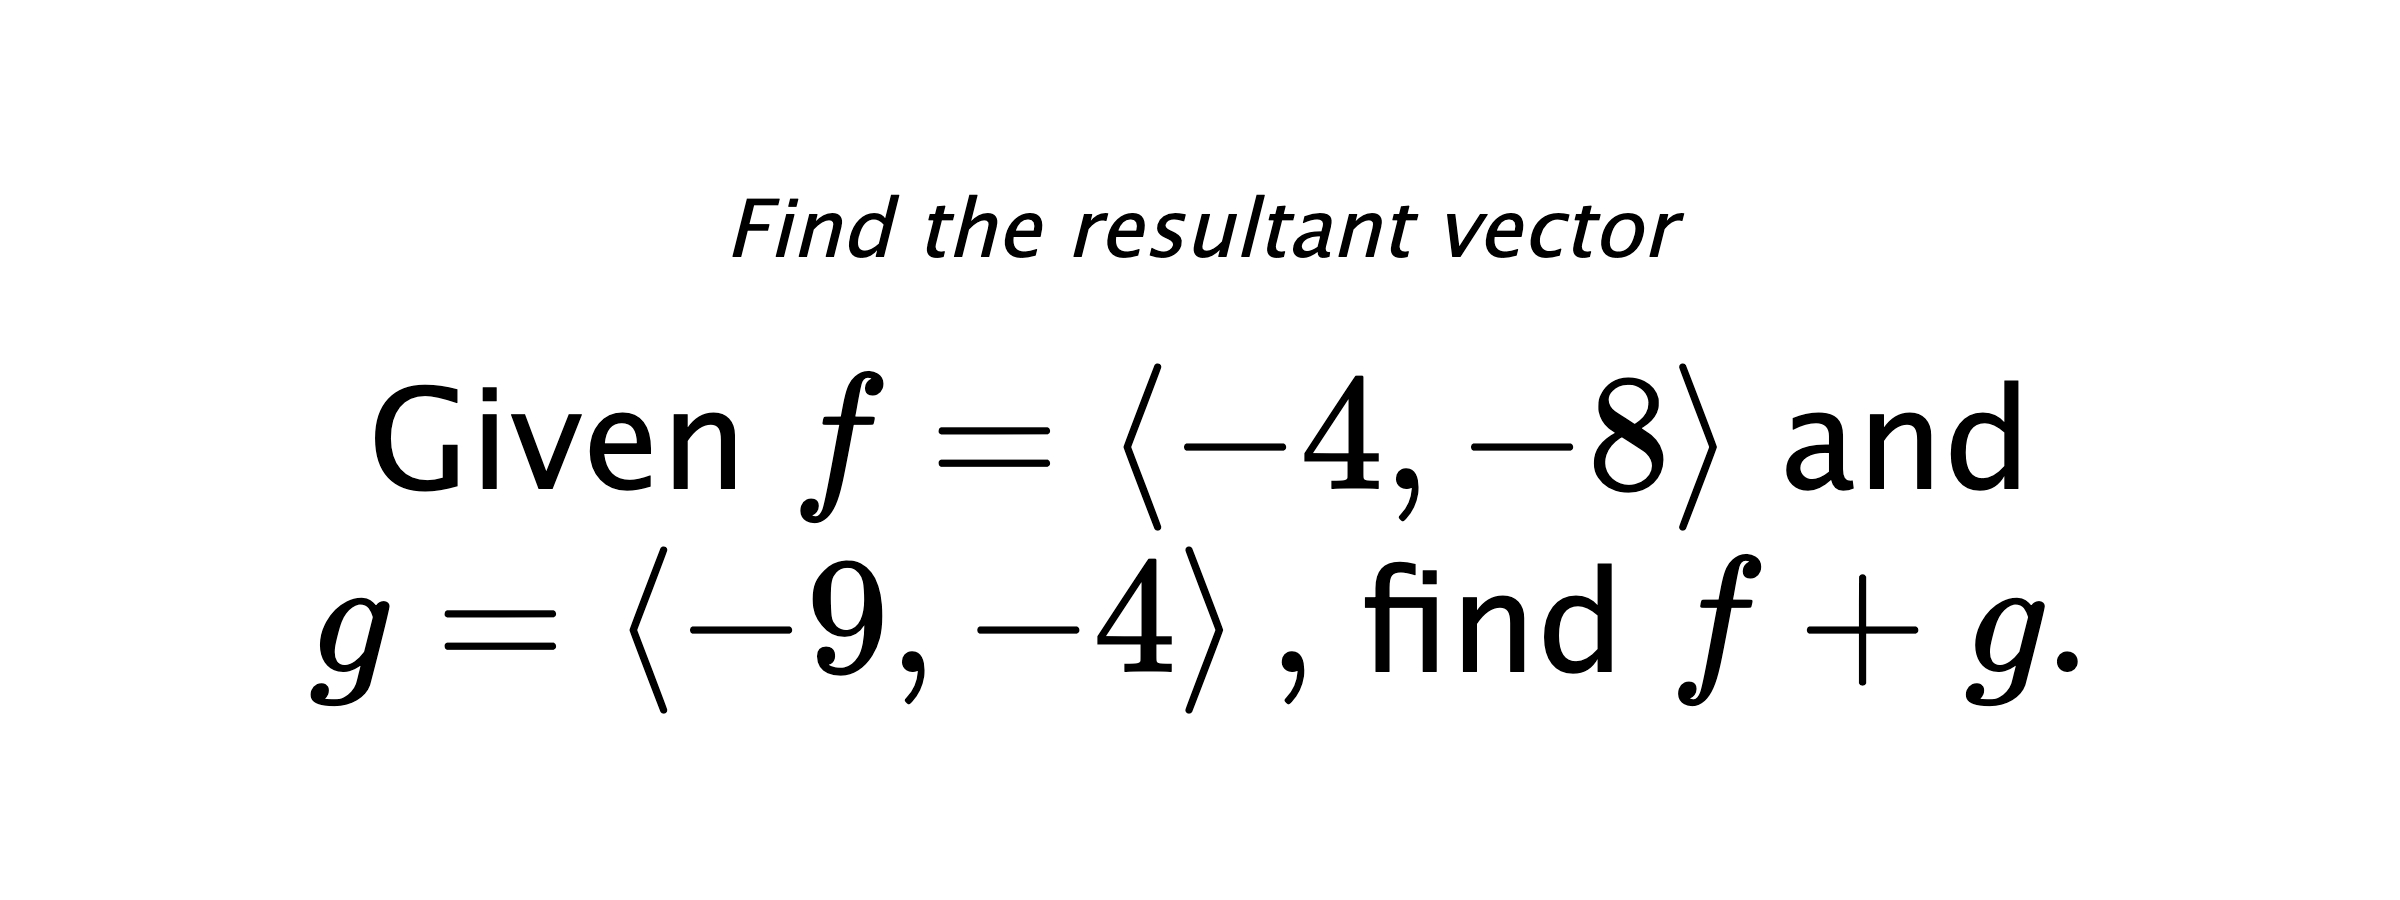 Find the resultant vector Given $ f = \left< -4,-8 \right> $ and $ g = \left< -9,-4 \right> ,$ find $ f+g .$